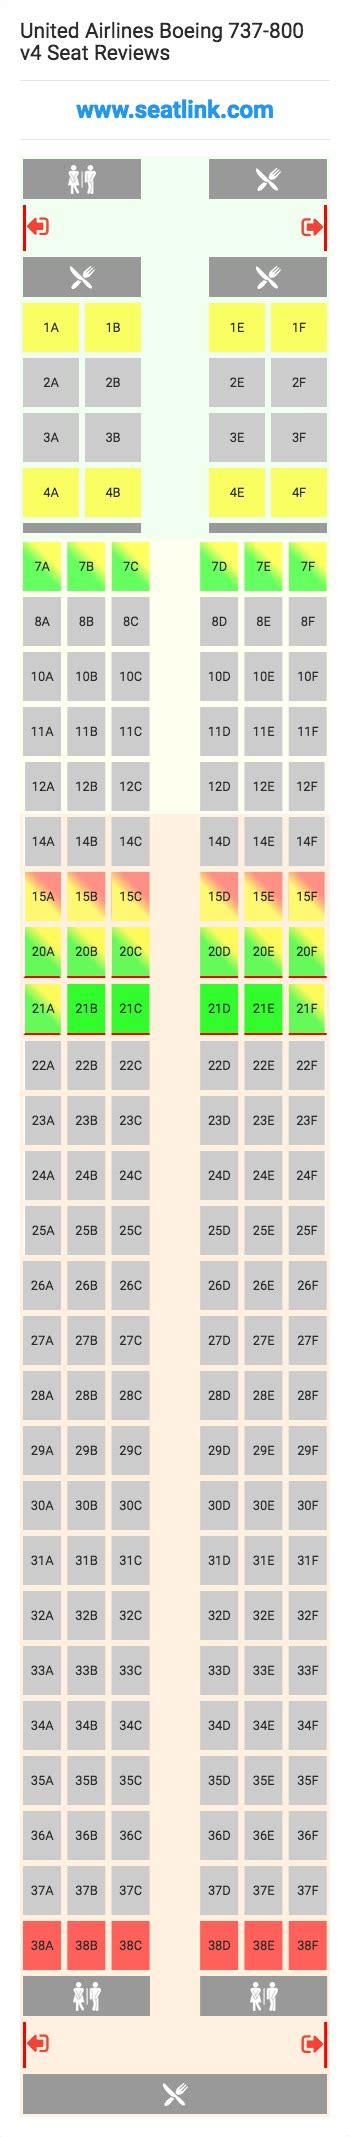 Southwest Airlines Boeing Seating Chart Elcho Table